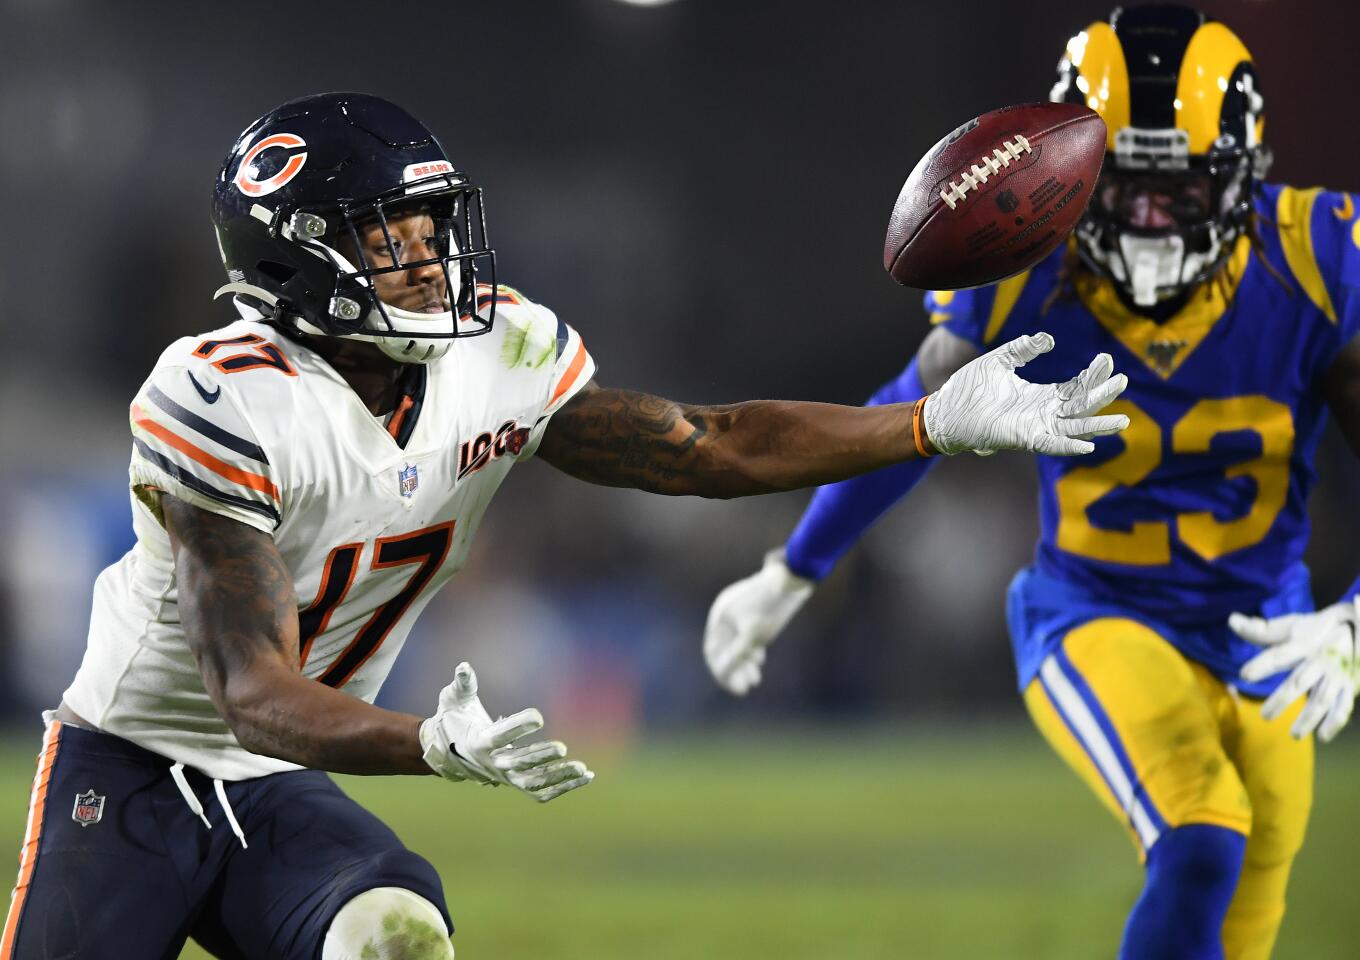 Bears wide receiver Anthony Miller can't haul in a catch in front of Rams cornerback Nickell Robey-Coleman.